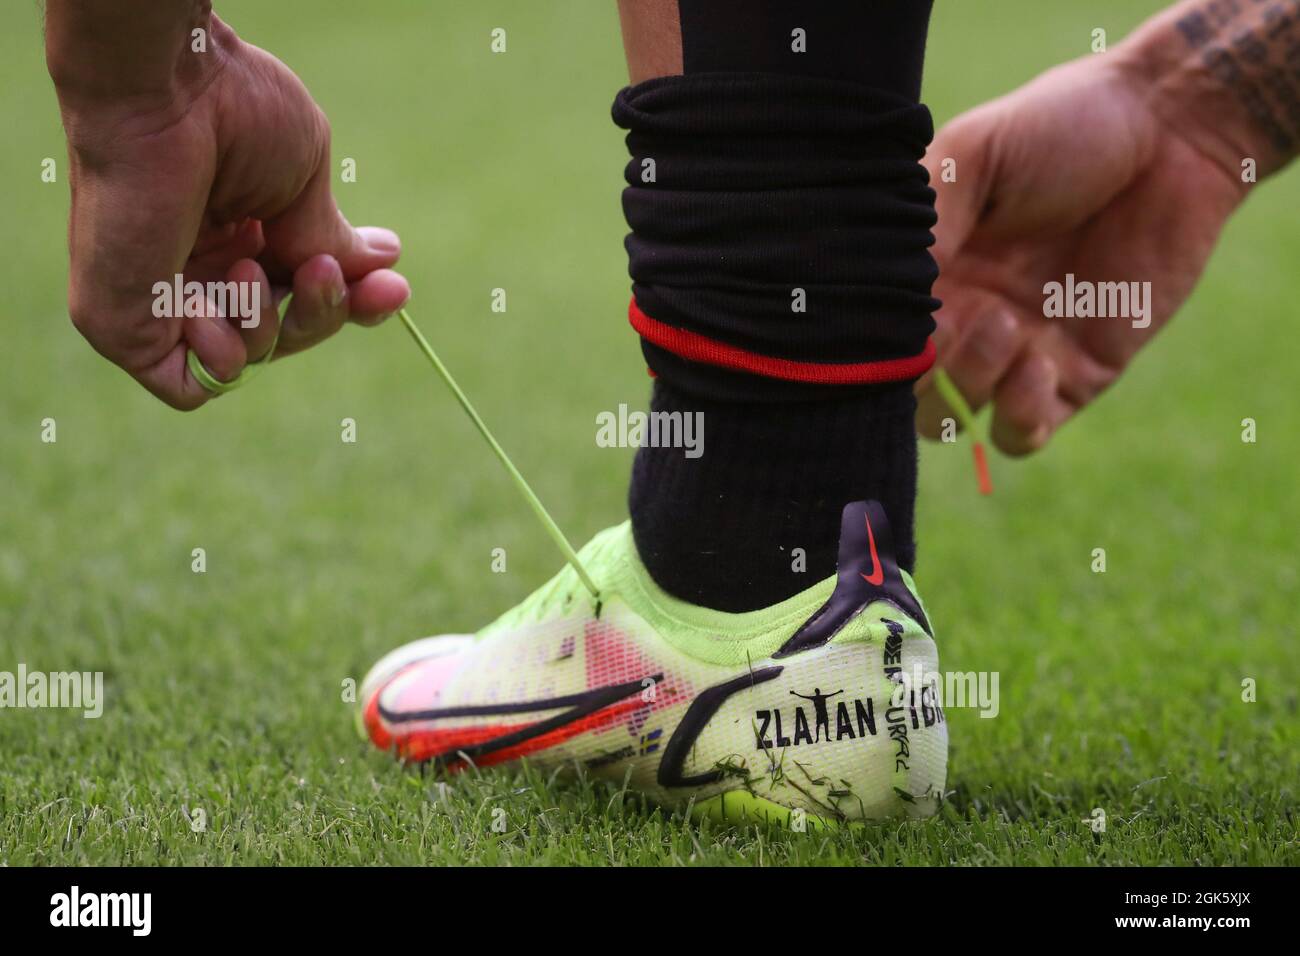 Milan, Italy, 12th September 2021. Zlatan Ibrahimovic of AC Milan laces his  personalised Nike Mercurial football boots during the warm up prior to the  Serie A match at Giuseppe Meazza, Milan. Picture